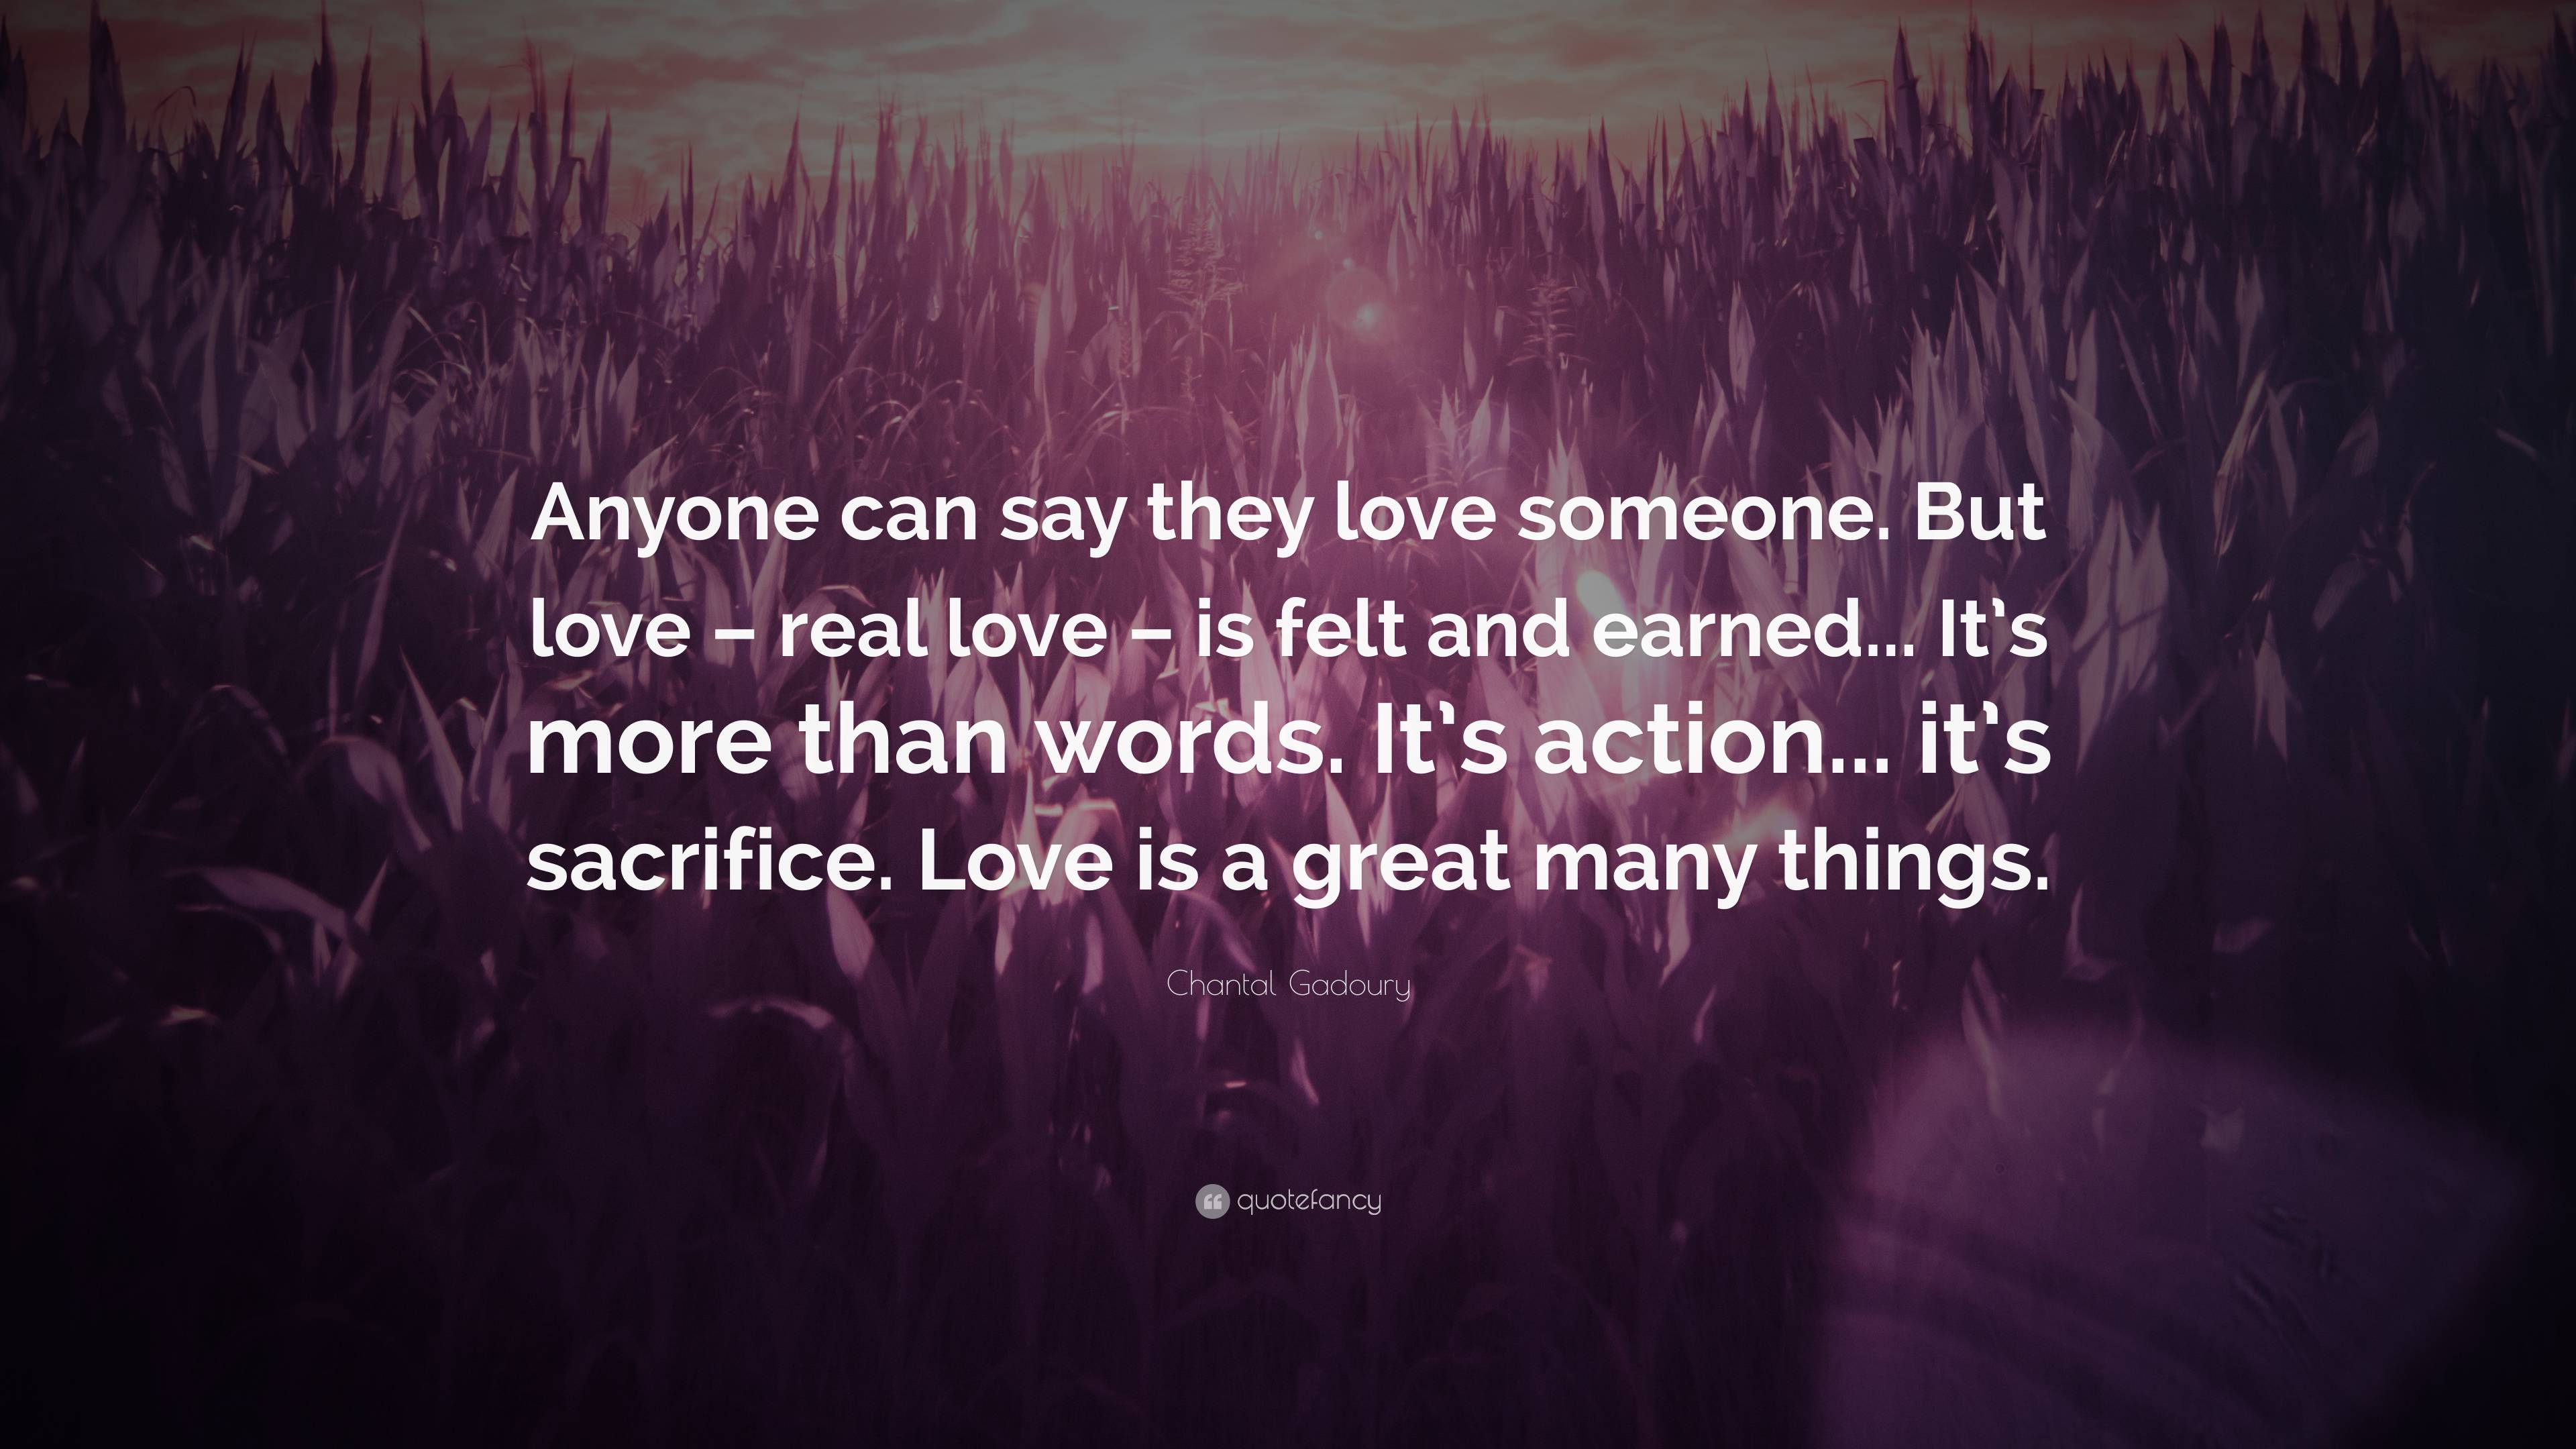 Chantal Gadoury Quote: “Anyone can say they love someone. But love – real  love – is felt and earned It's more than words. It's action it's”